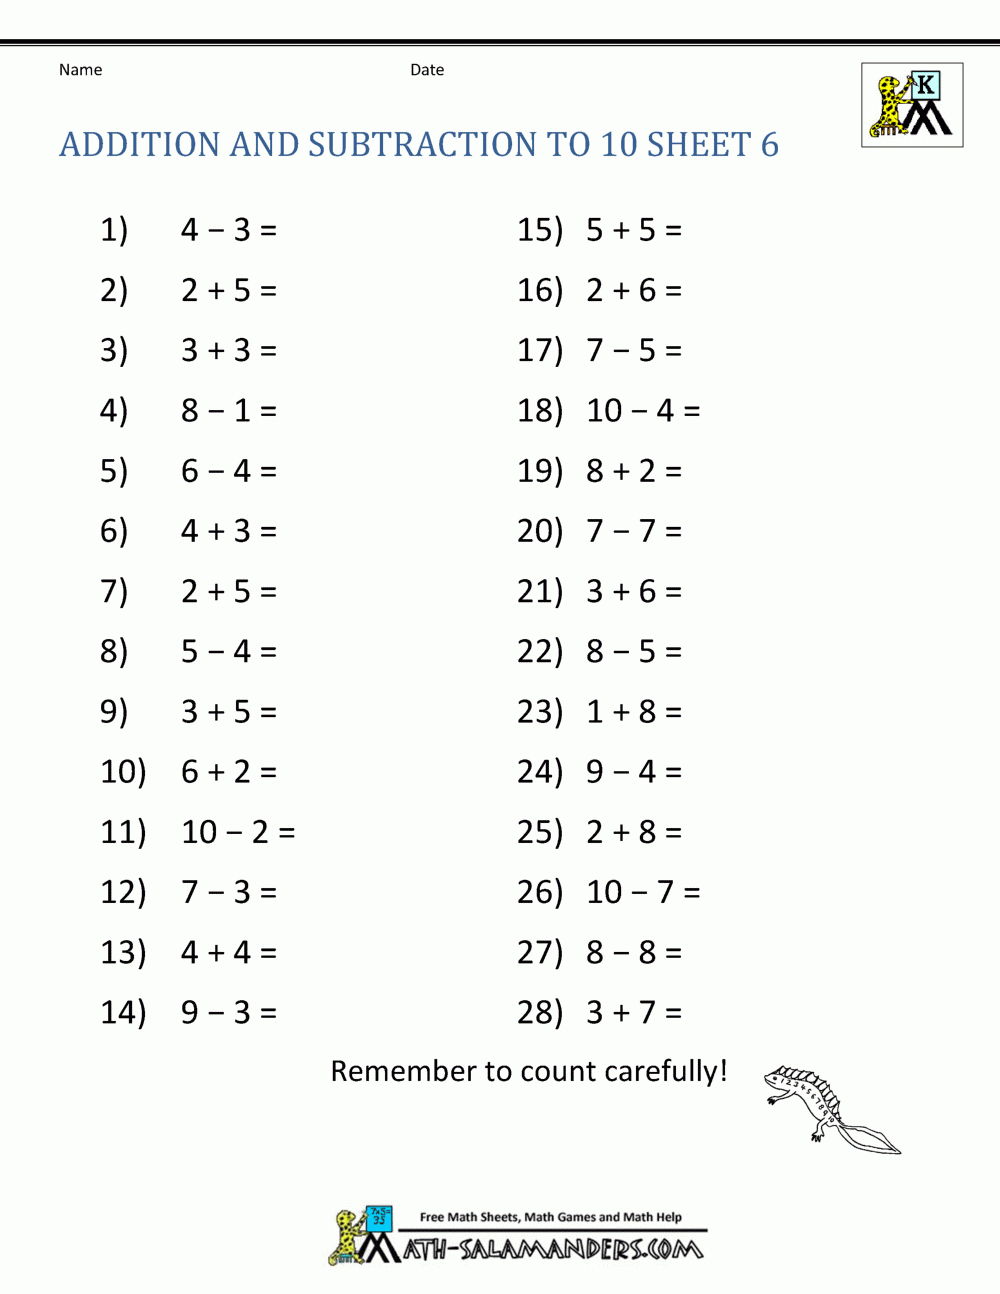 Addition And Subtraction Worksheets For Kindergarten Regarding Free Math Worksheets For Kindergarten Addition And Subtraction